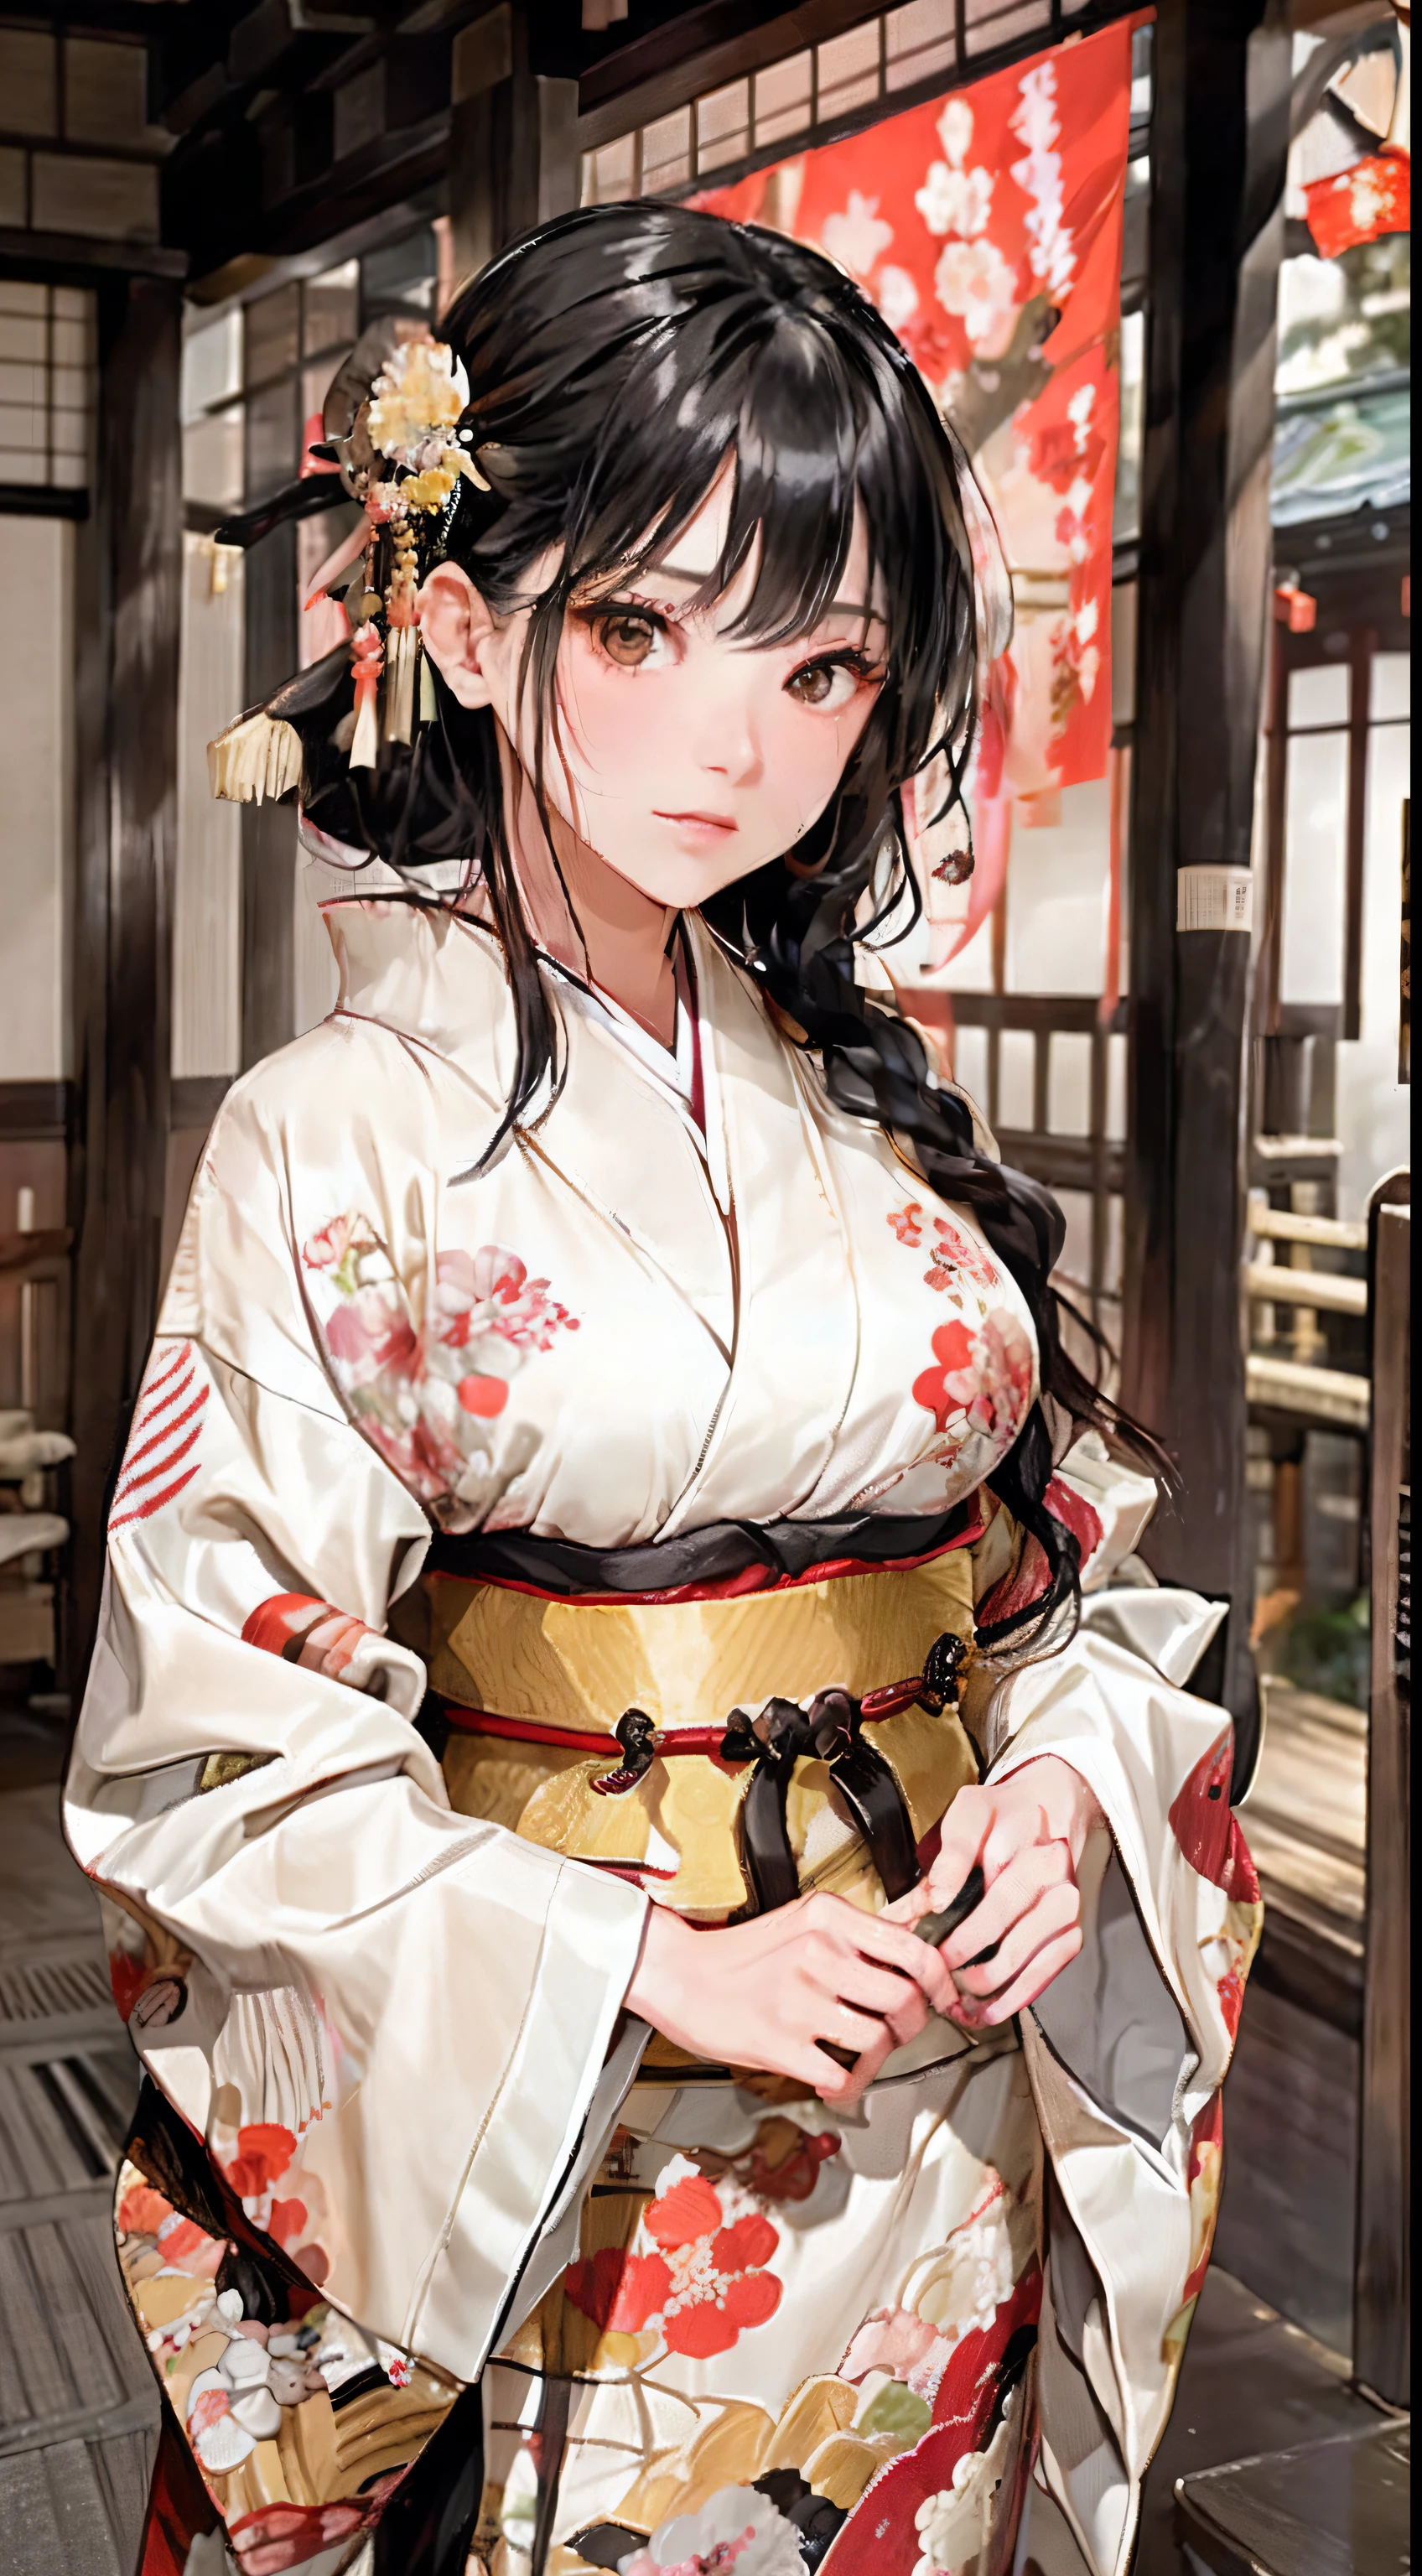 (Oiran:1.4)、1girl in,Black hair fringe long hair、Braided hair、disheveled hair、Light brown eyes、(Extraordinary beauty)、(dignified expression)、(Traditional kimono with colorful and shiny luxury Japan:1.4)、(Big Tits:1.4)、(Photorealsitic)、(intricate detailes:1.2)、(​masterpiece、:1.3)、(top-quality:1.4)、(超A high resolution:1.2)、超A high resolution、(A detailed eye)、(detailed facial features)、Wearing kimono_Clothes、(Fantastic night:1.4)、cherry trees、Big Moon、Five-storied Pagoda、Japan Temple